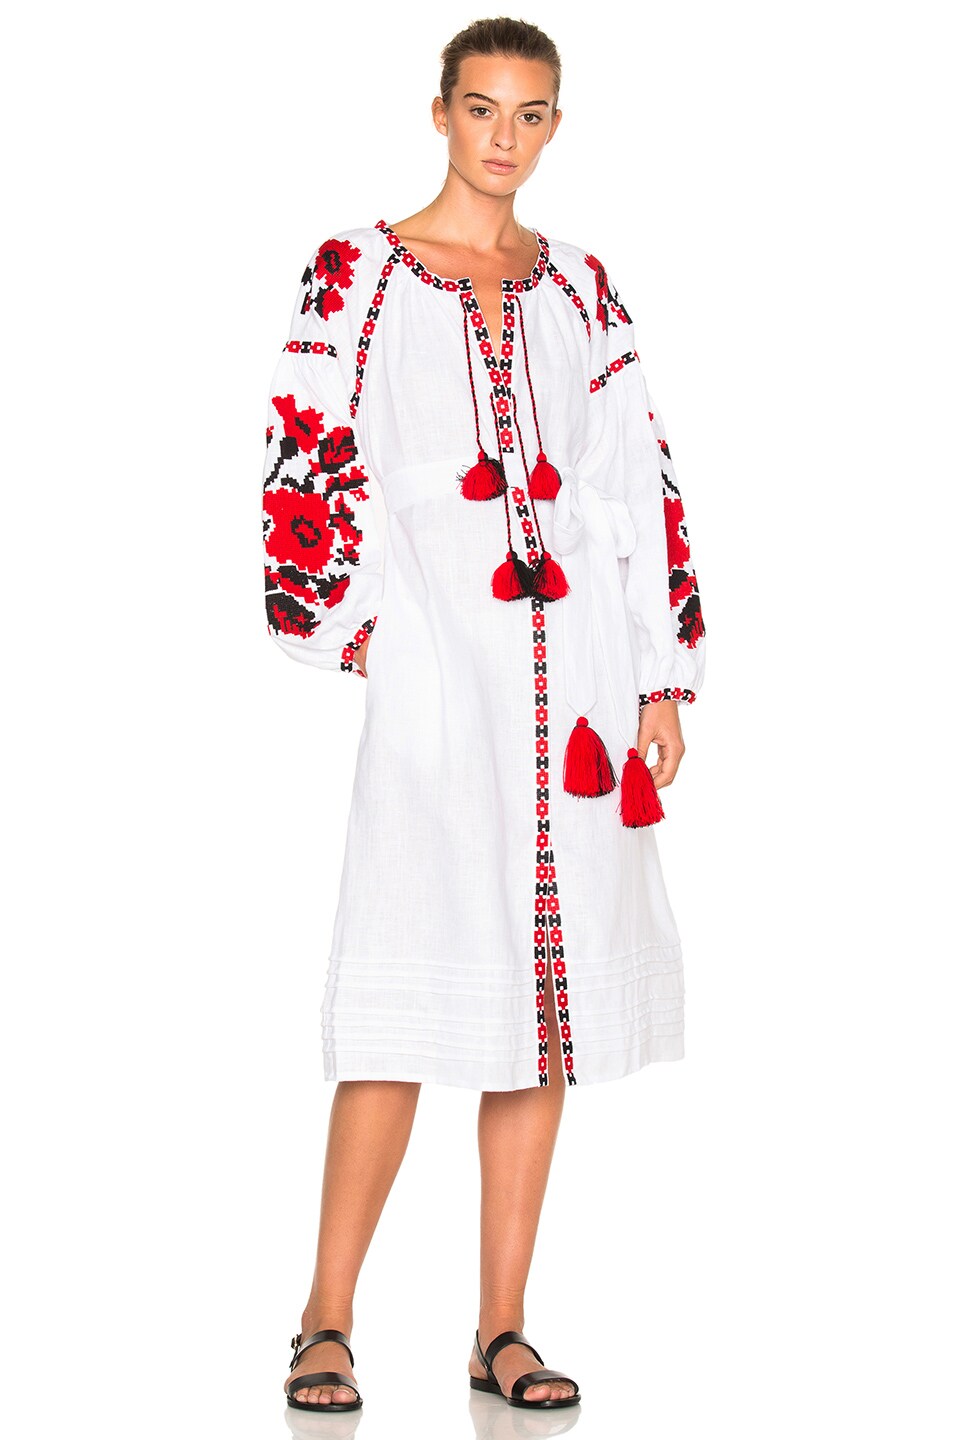 March 11 Floral Pixel Midi Dress in Red & White | FWRD